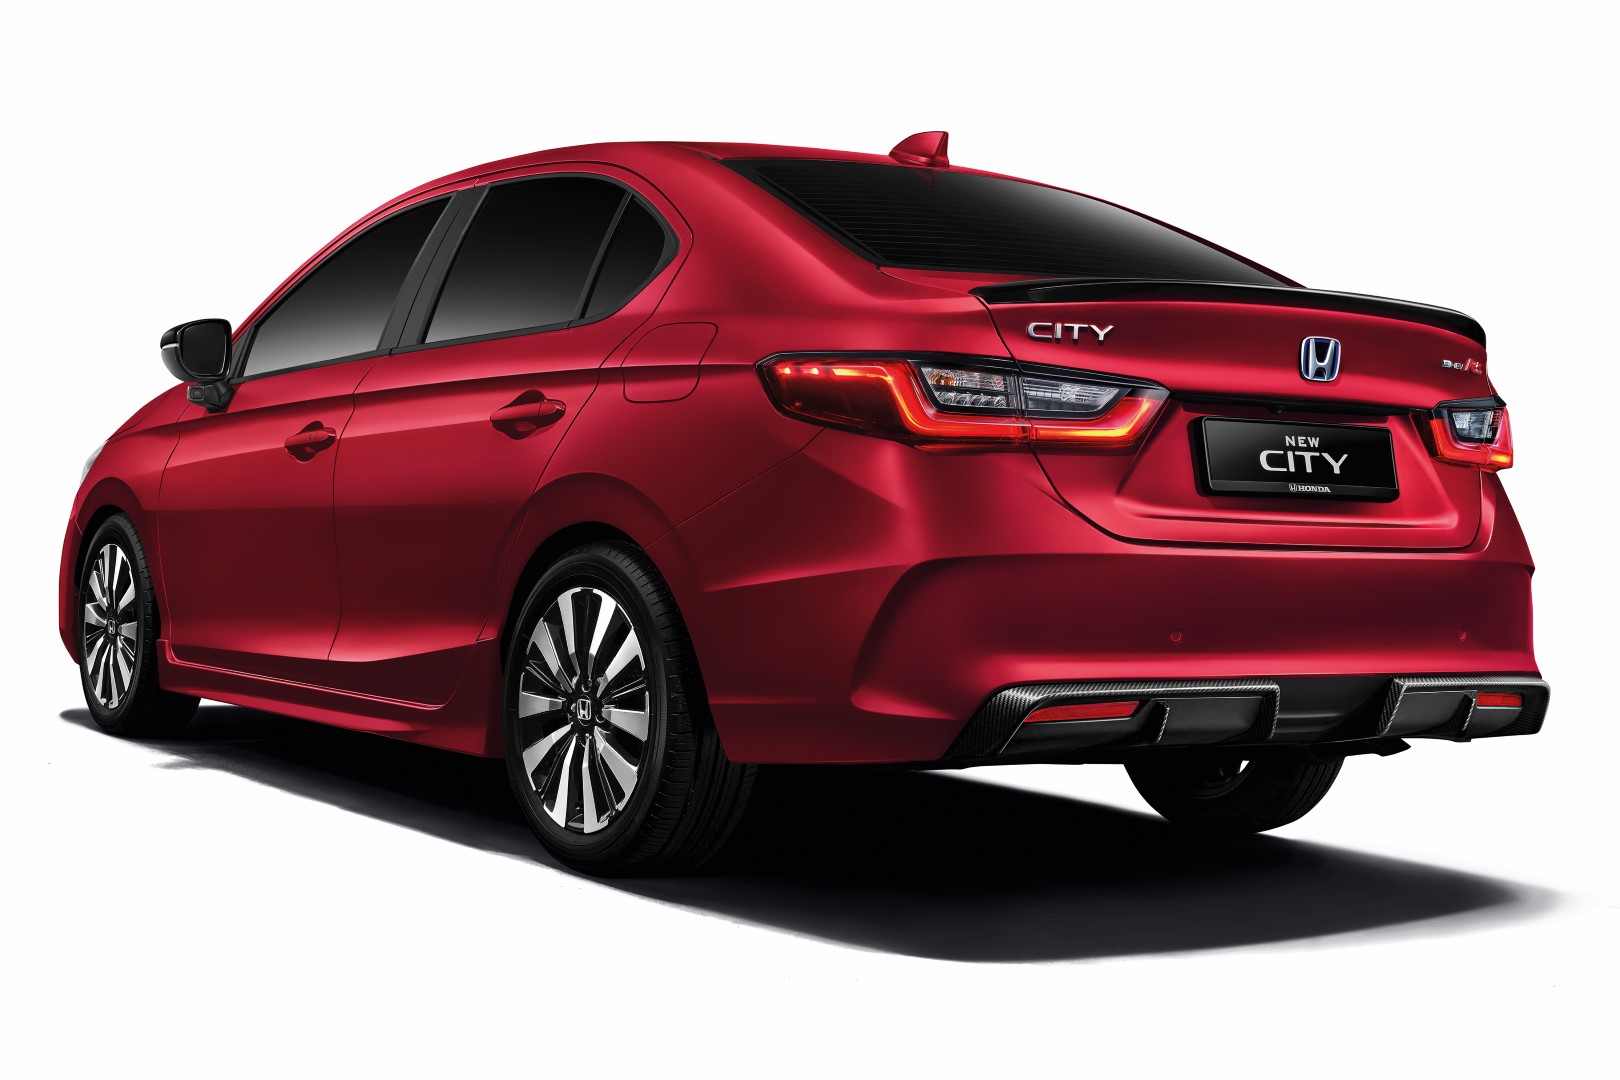 Honda City Facelift gets new Honda Sensing features, now open for booking